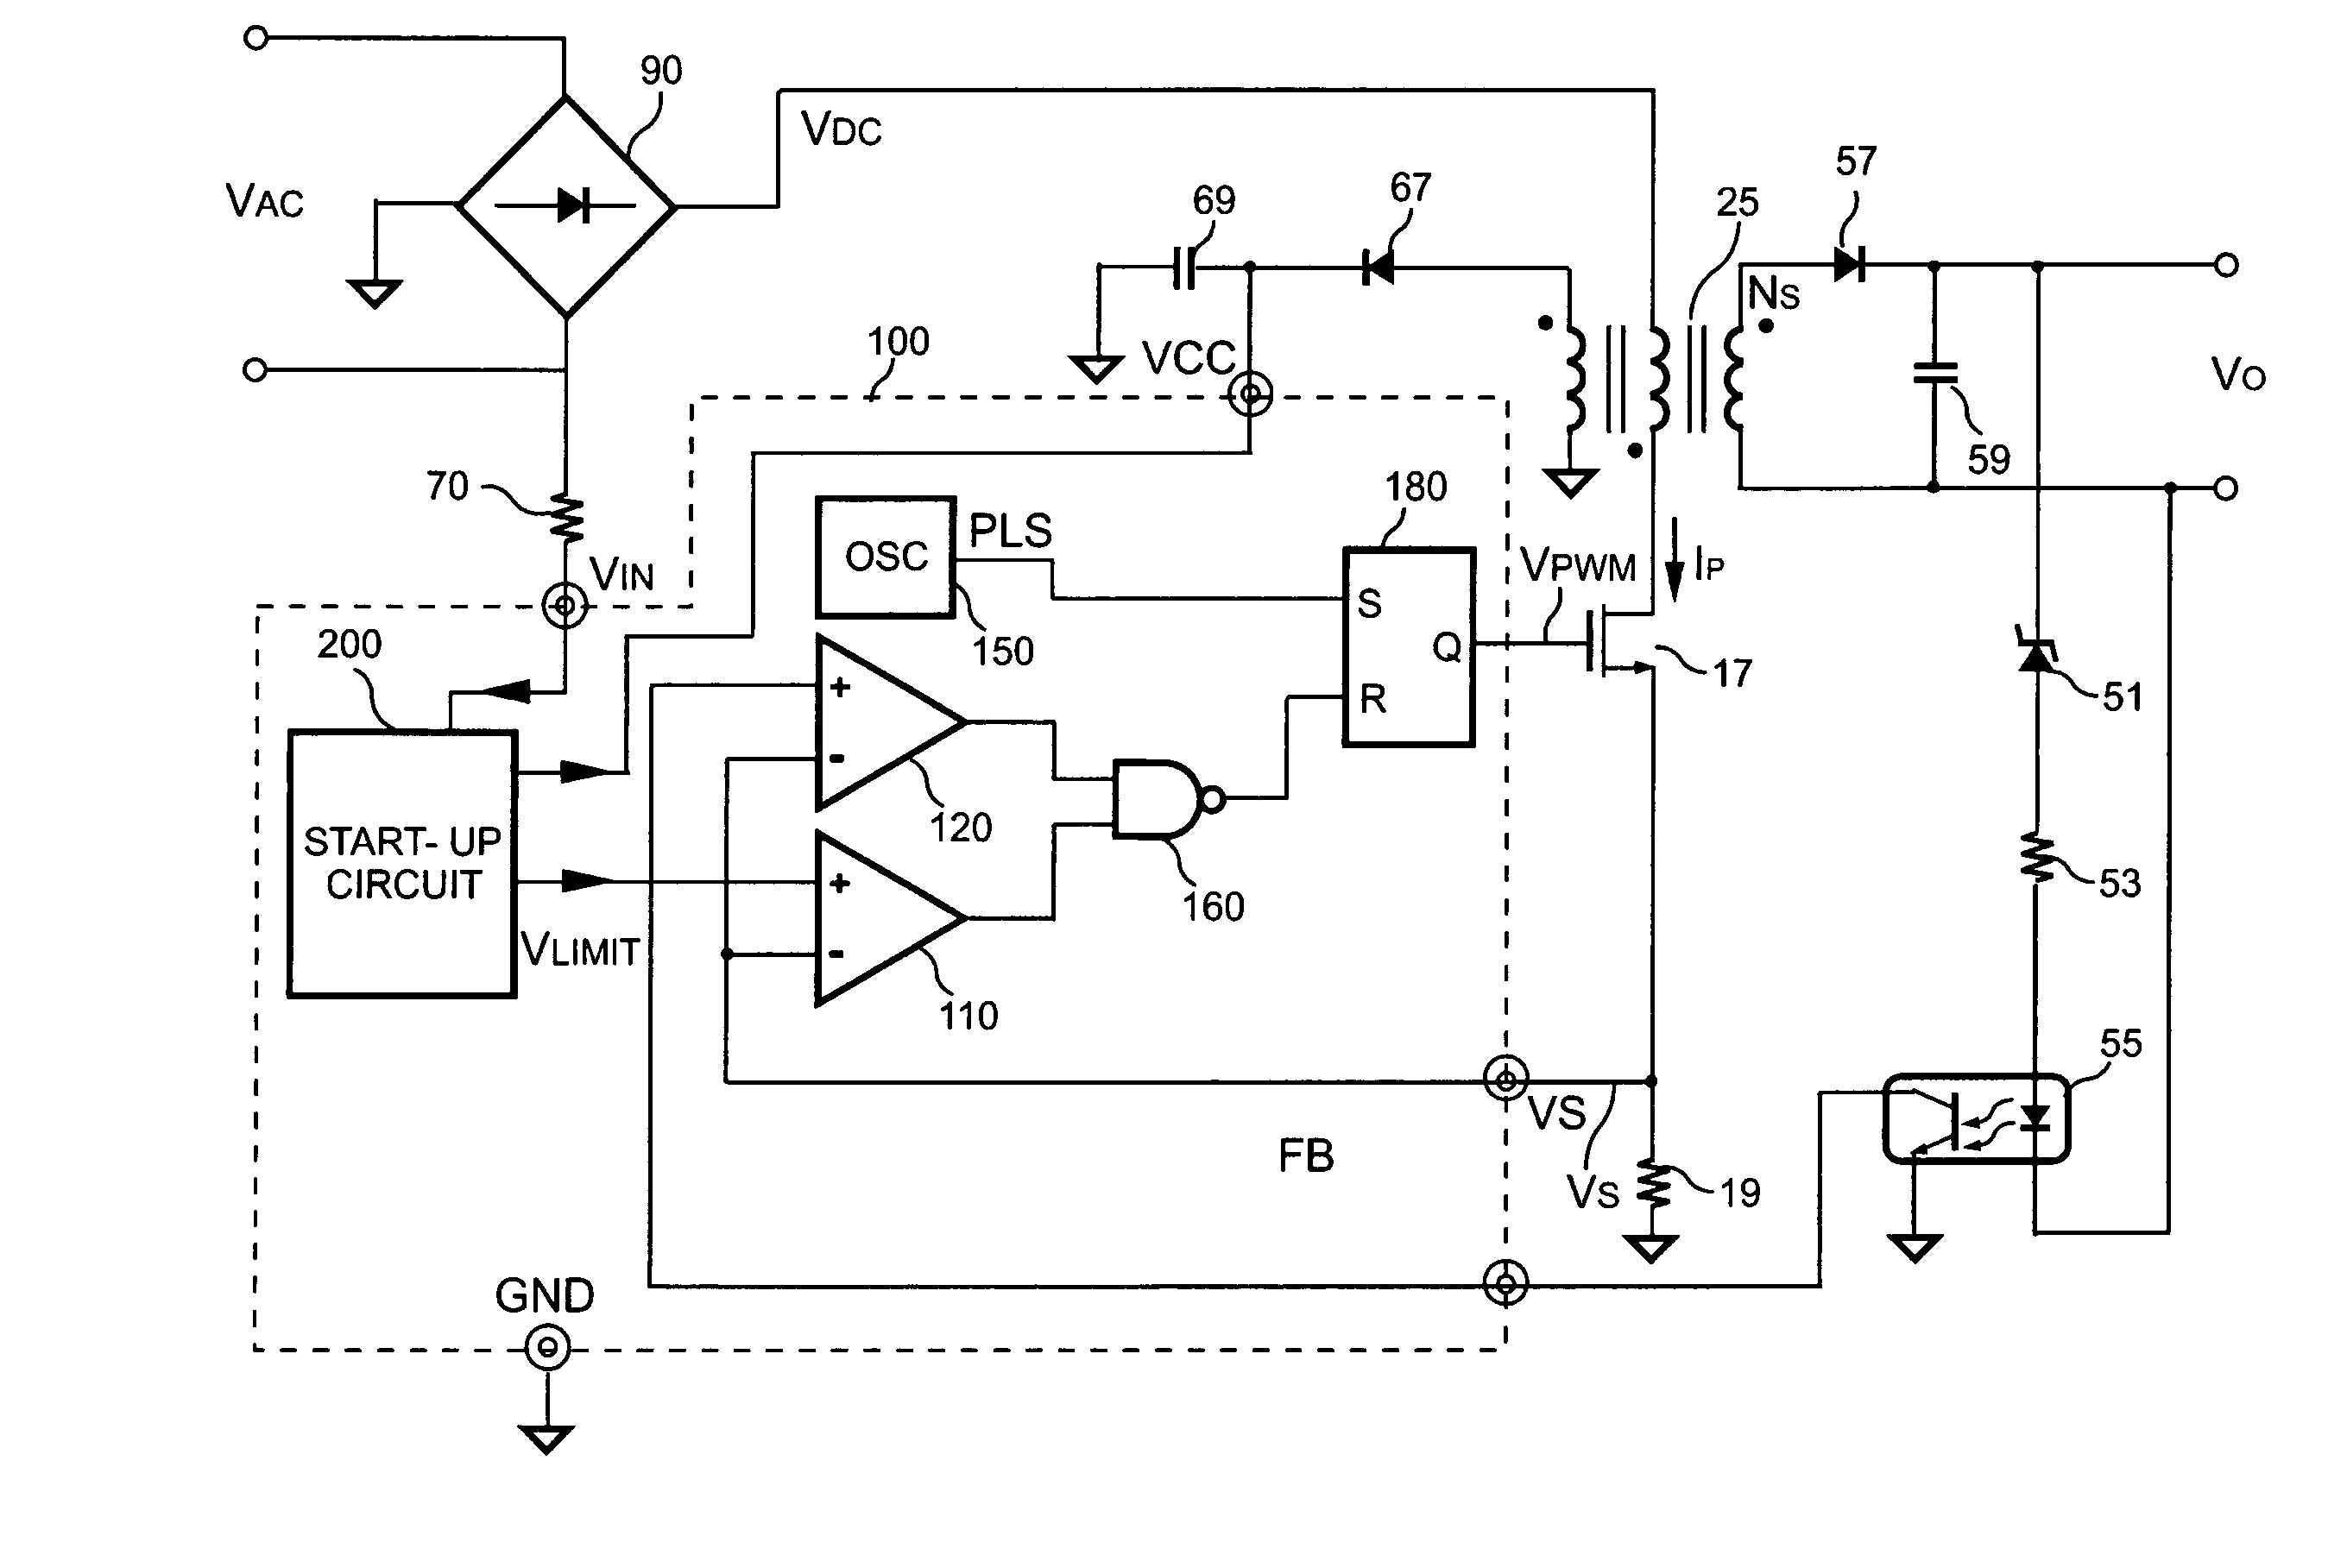 Start-up circuit with feedforward compensation for power converters